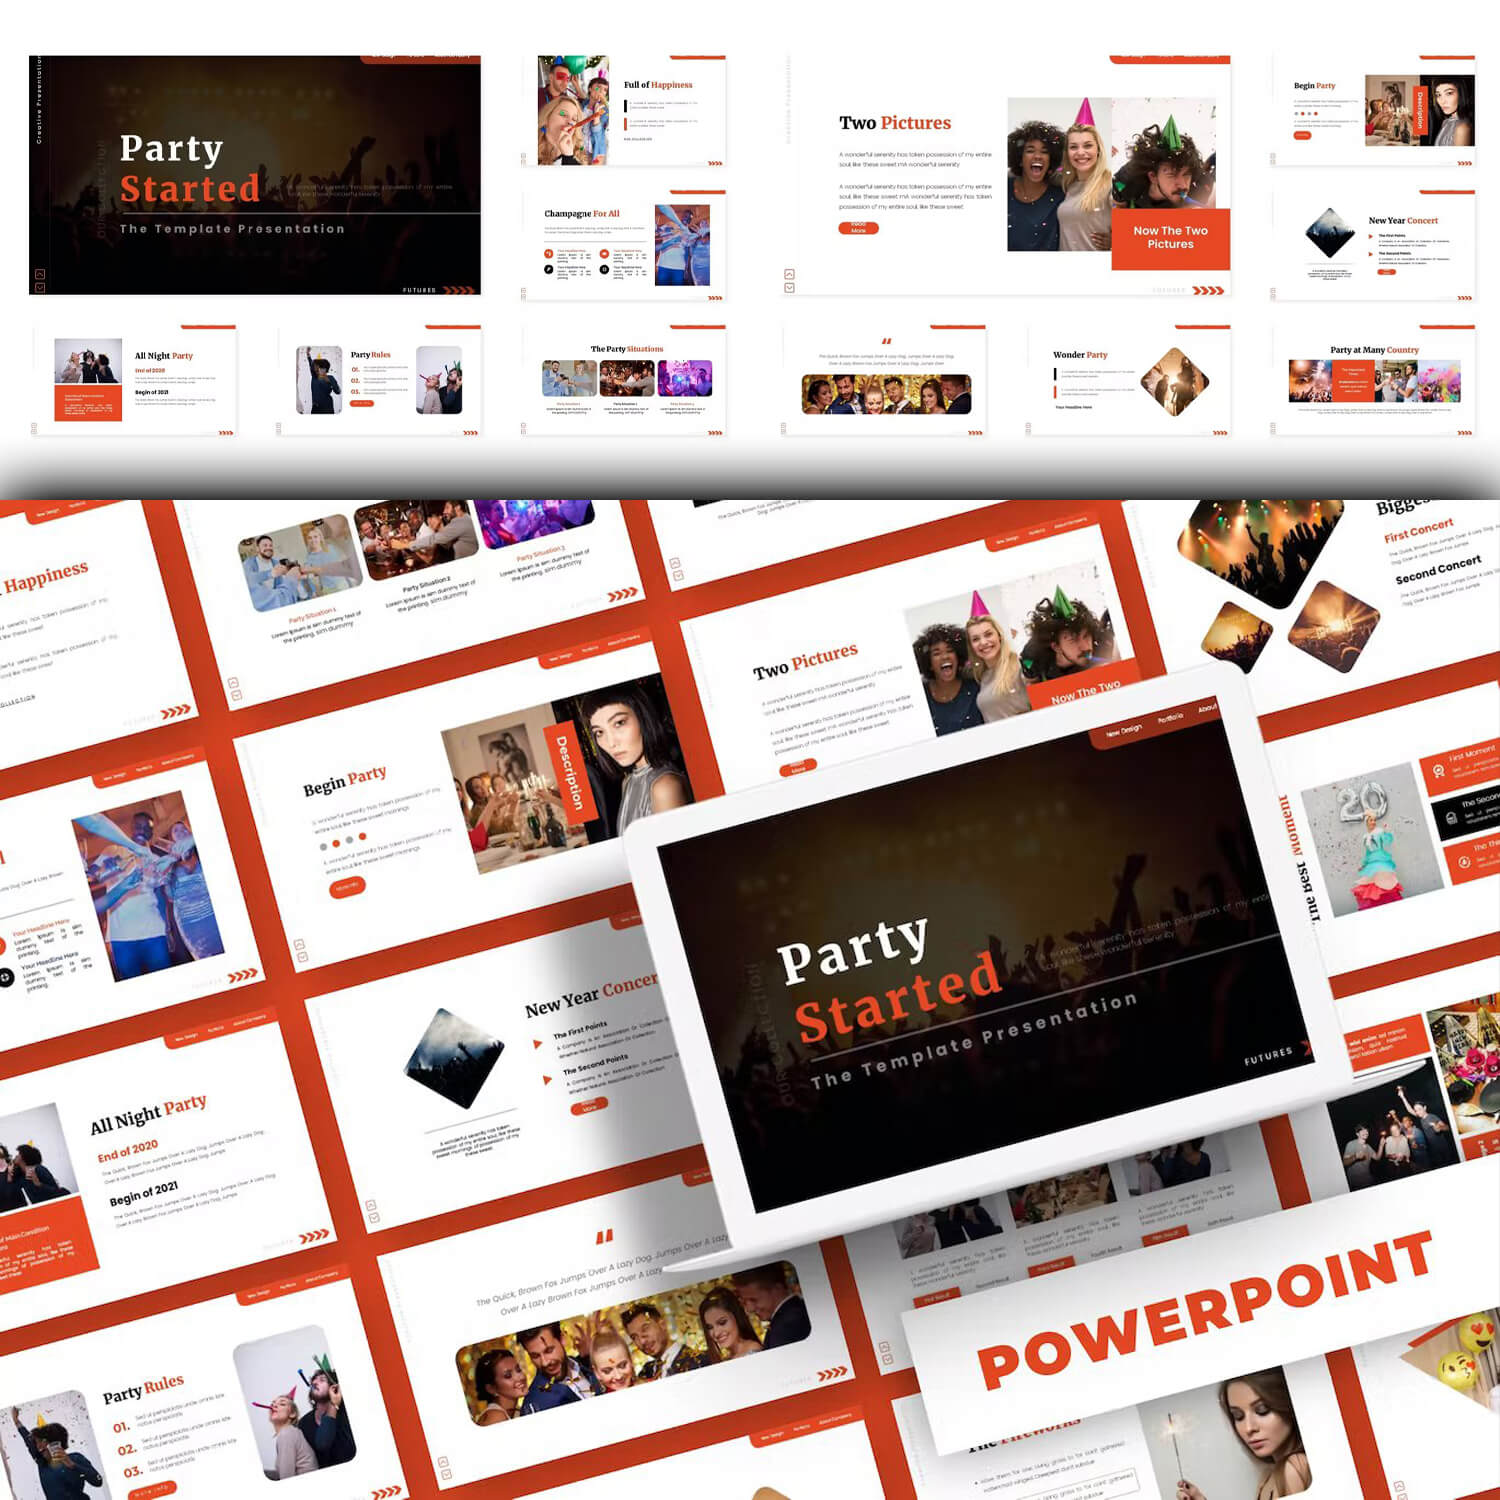 New year concert of Party Started - Powerpoint Template.